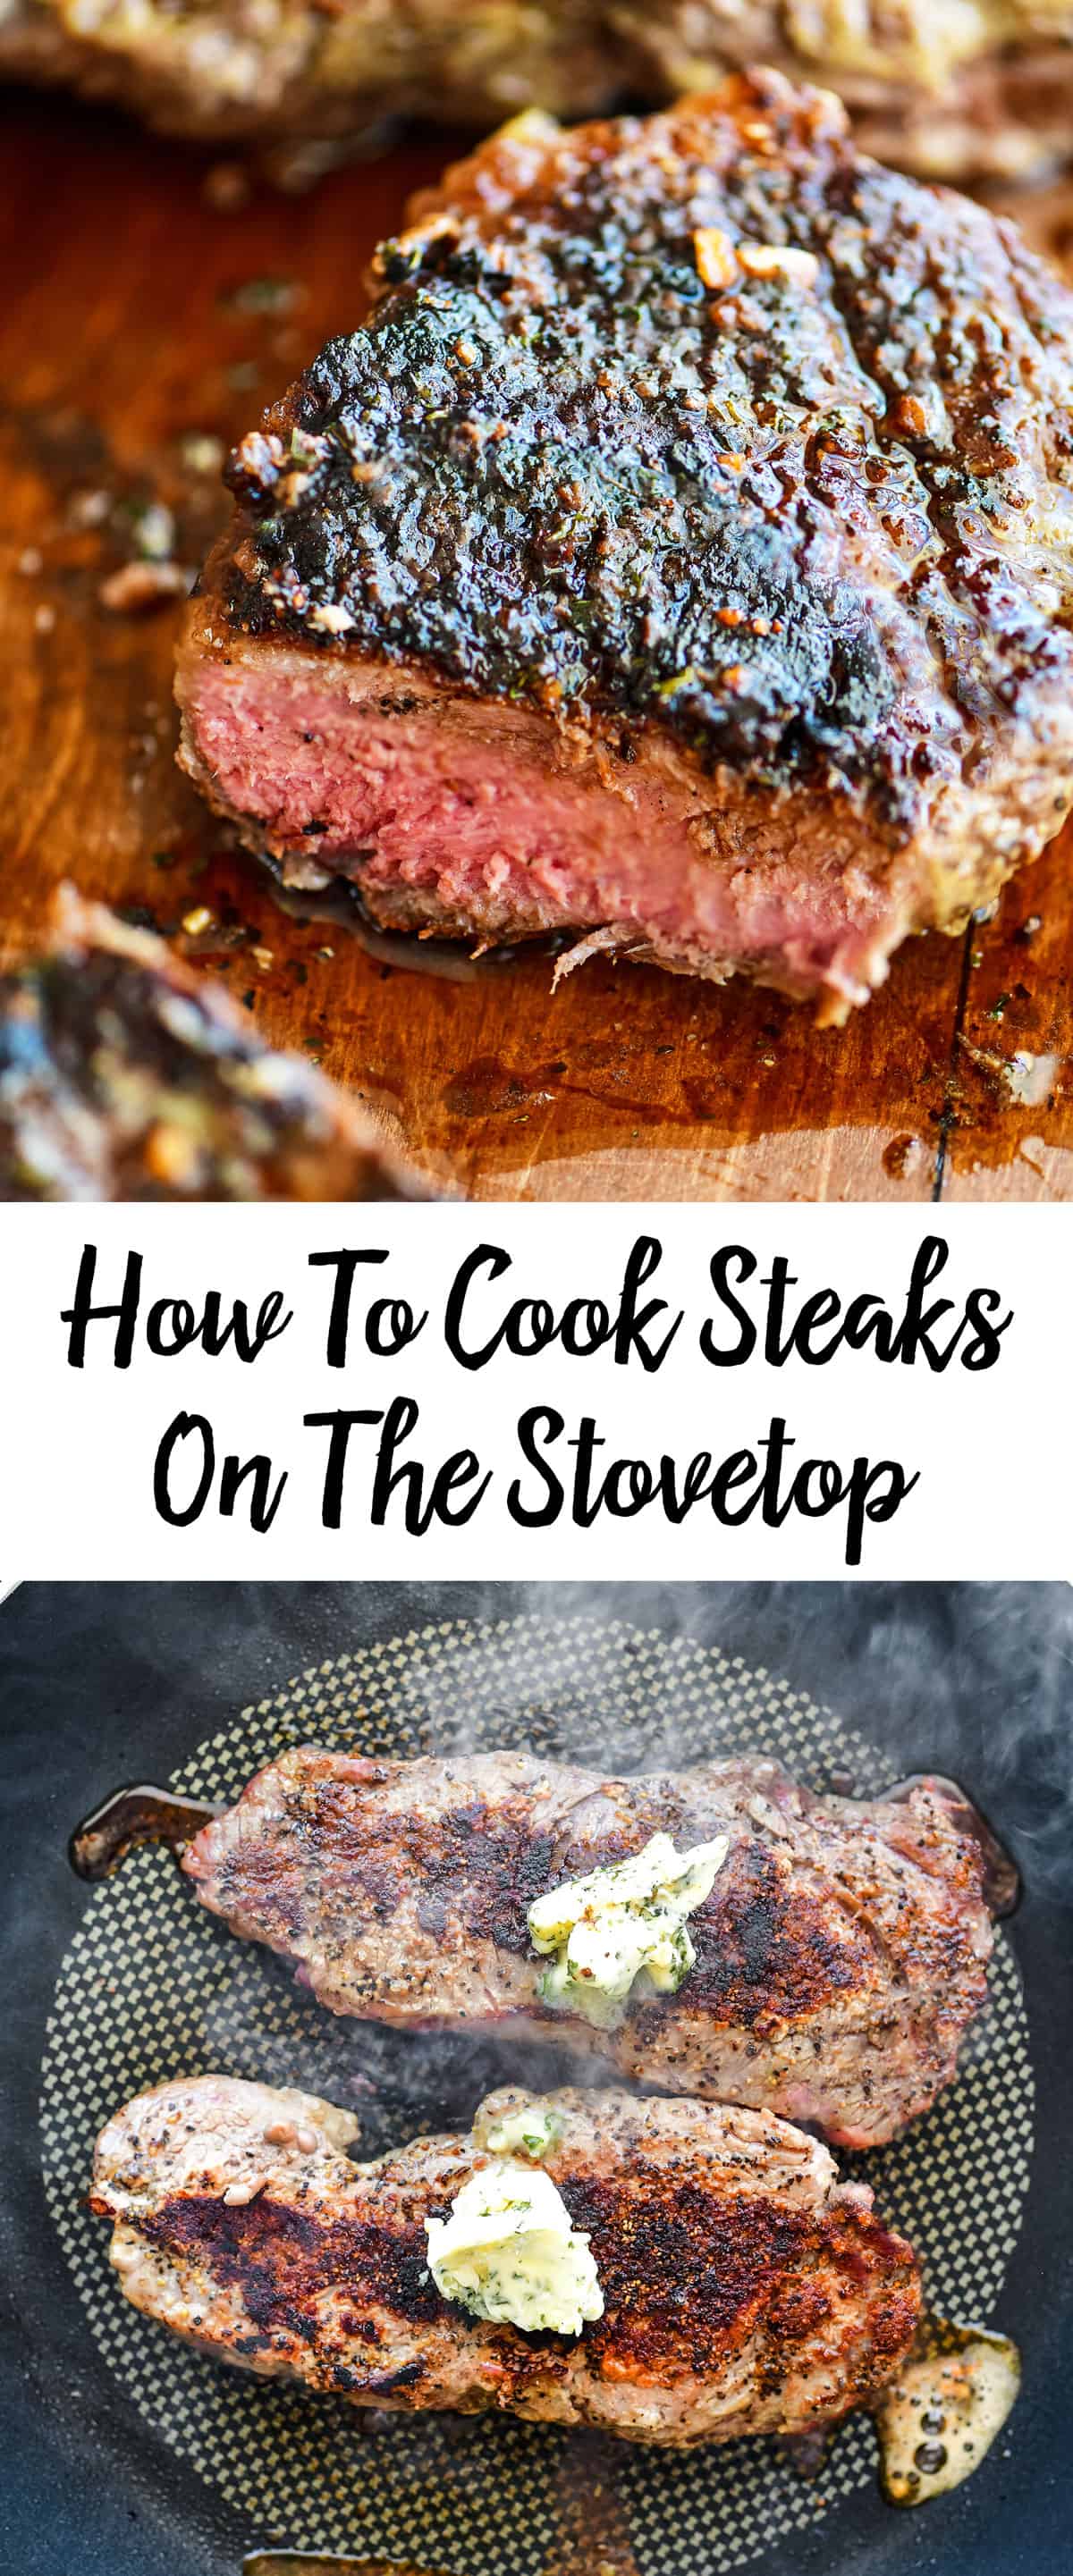 How To Cook Steaks On The Stovetop The Gunny Sack,African Bullfrog